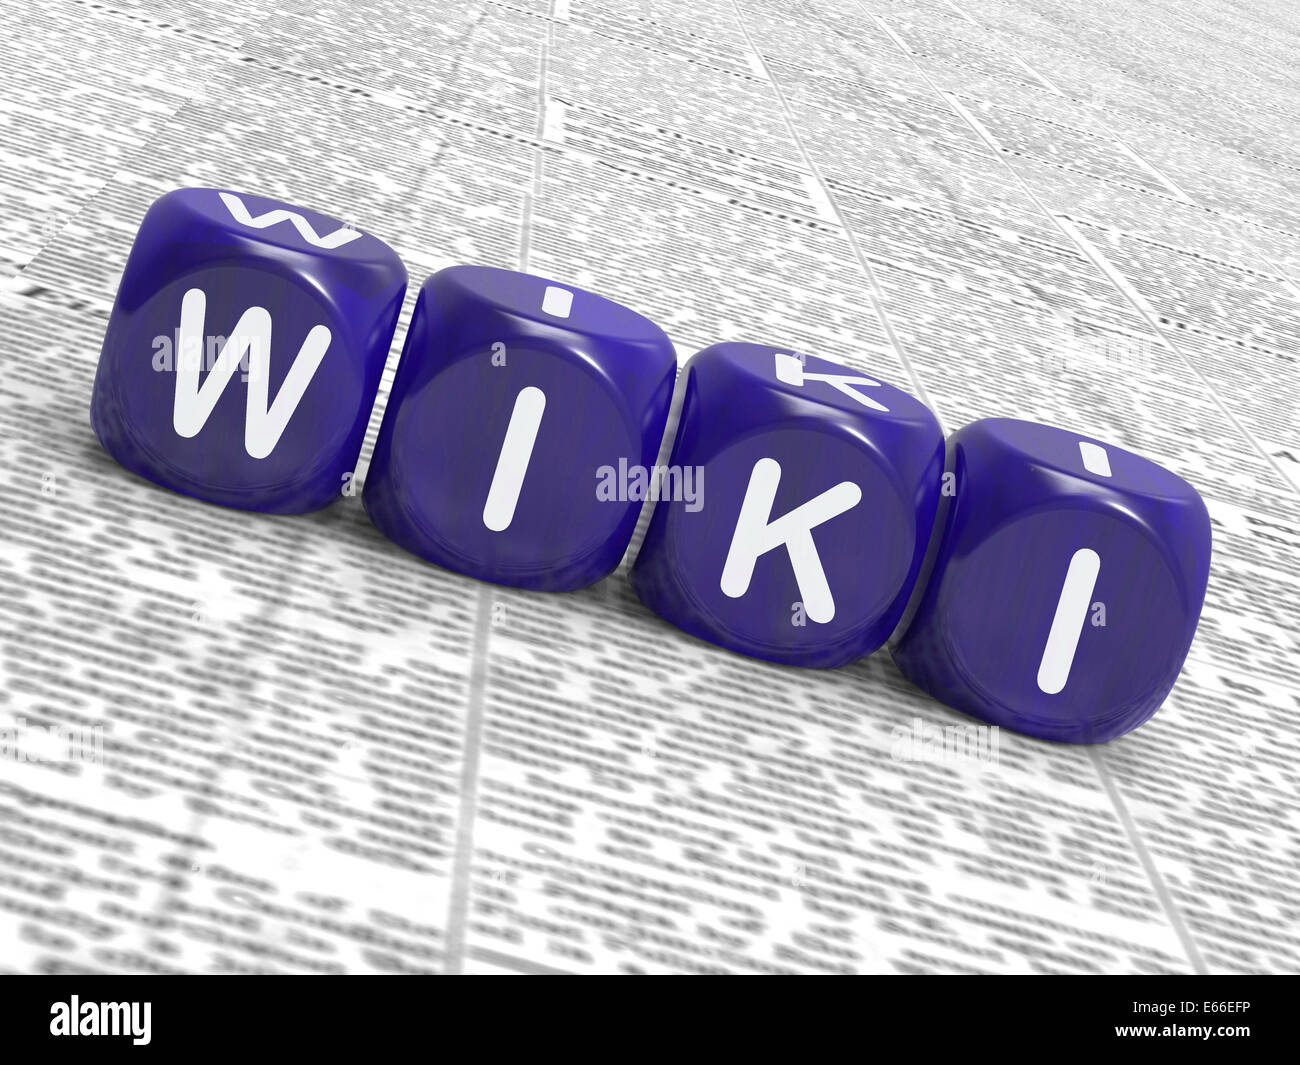 Wiki Dice Showing Learning Knowledge And Encyclopaedia Stock Photo